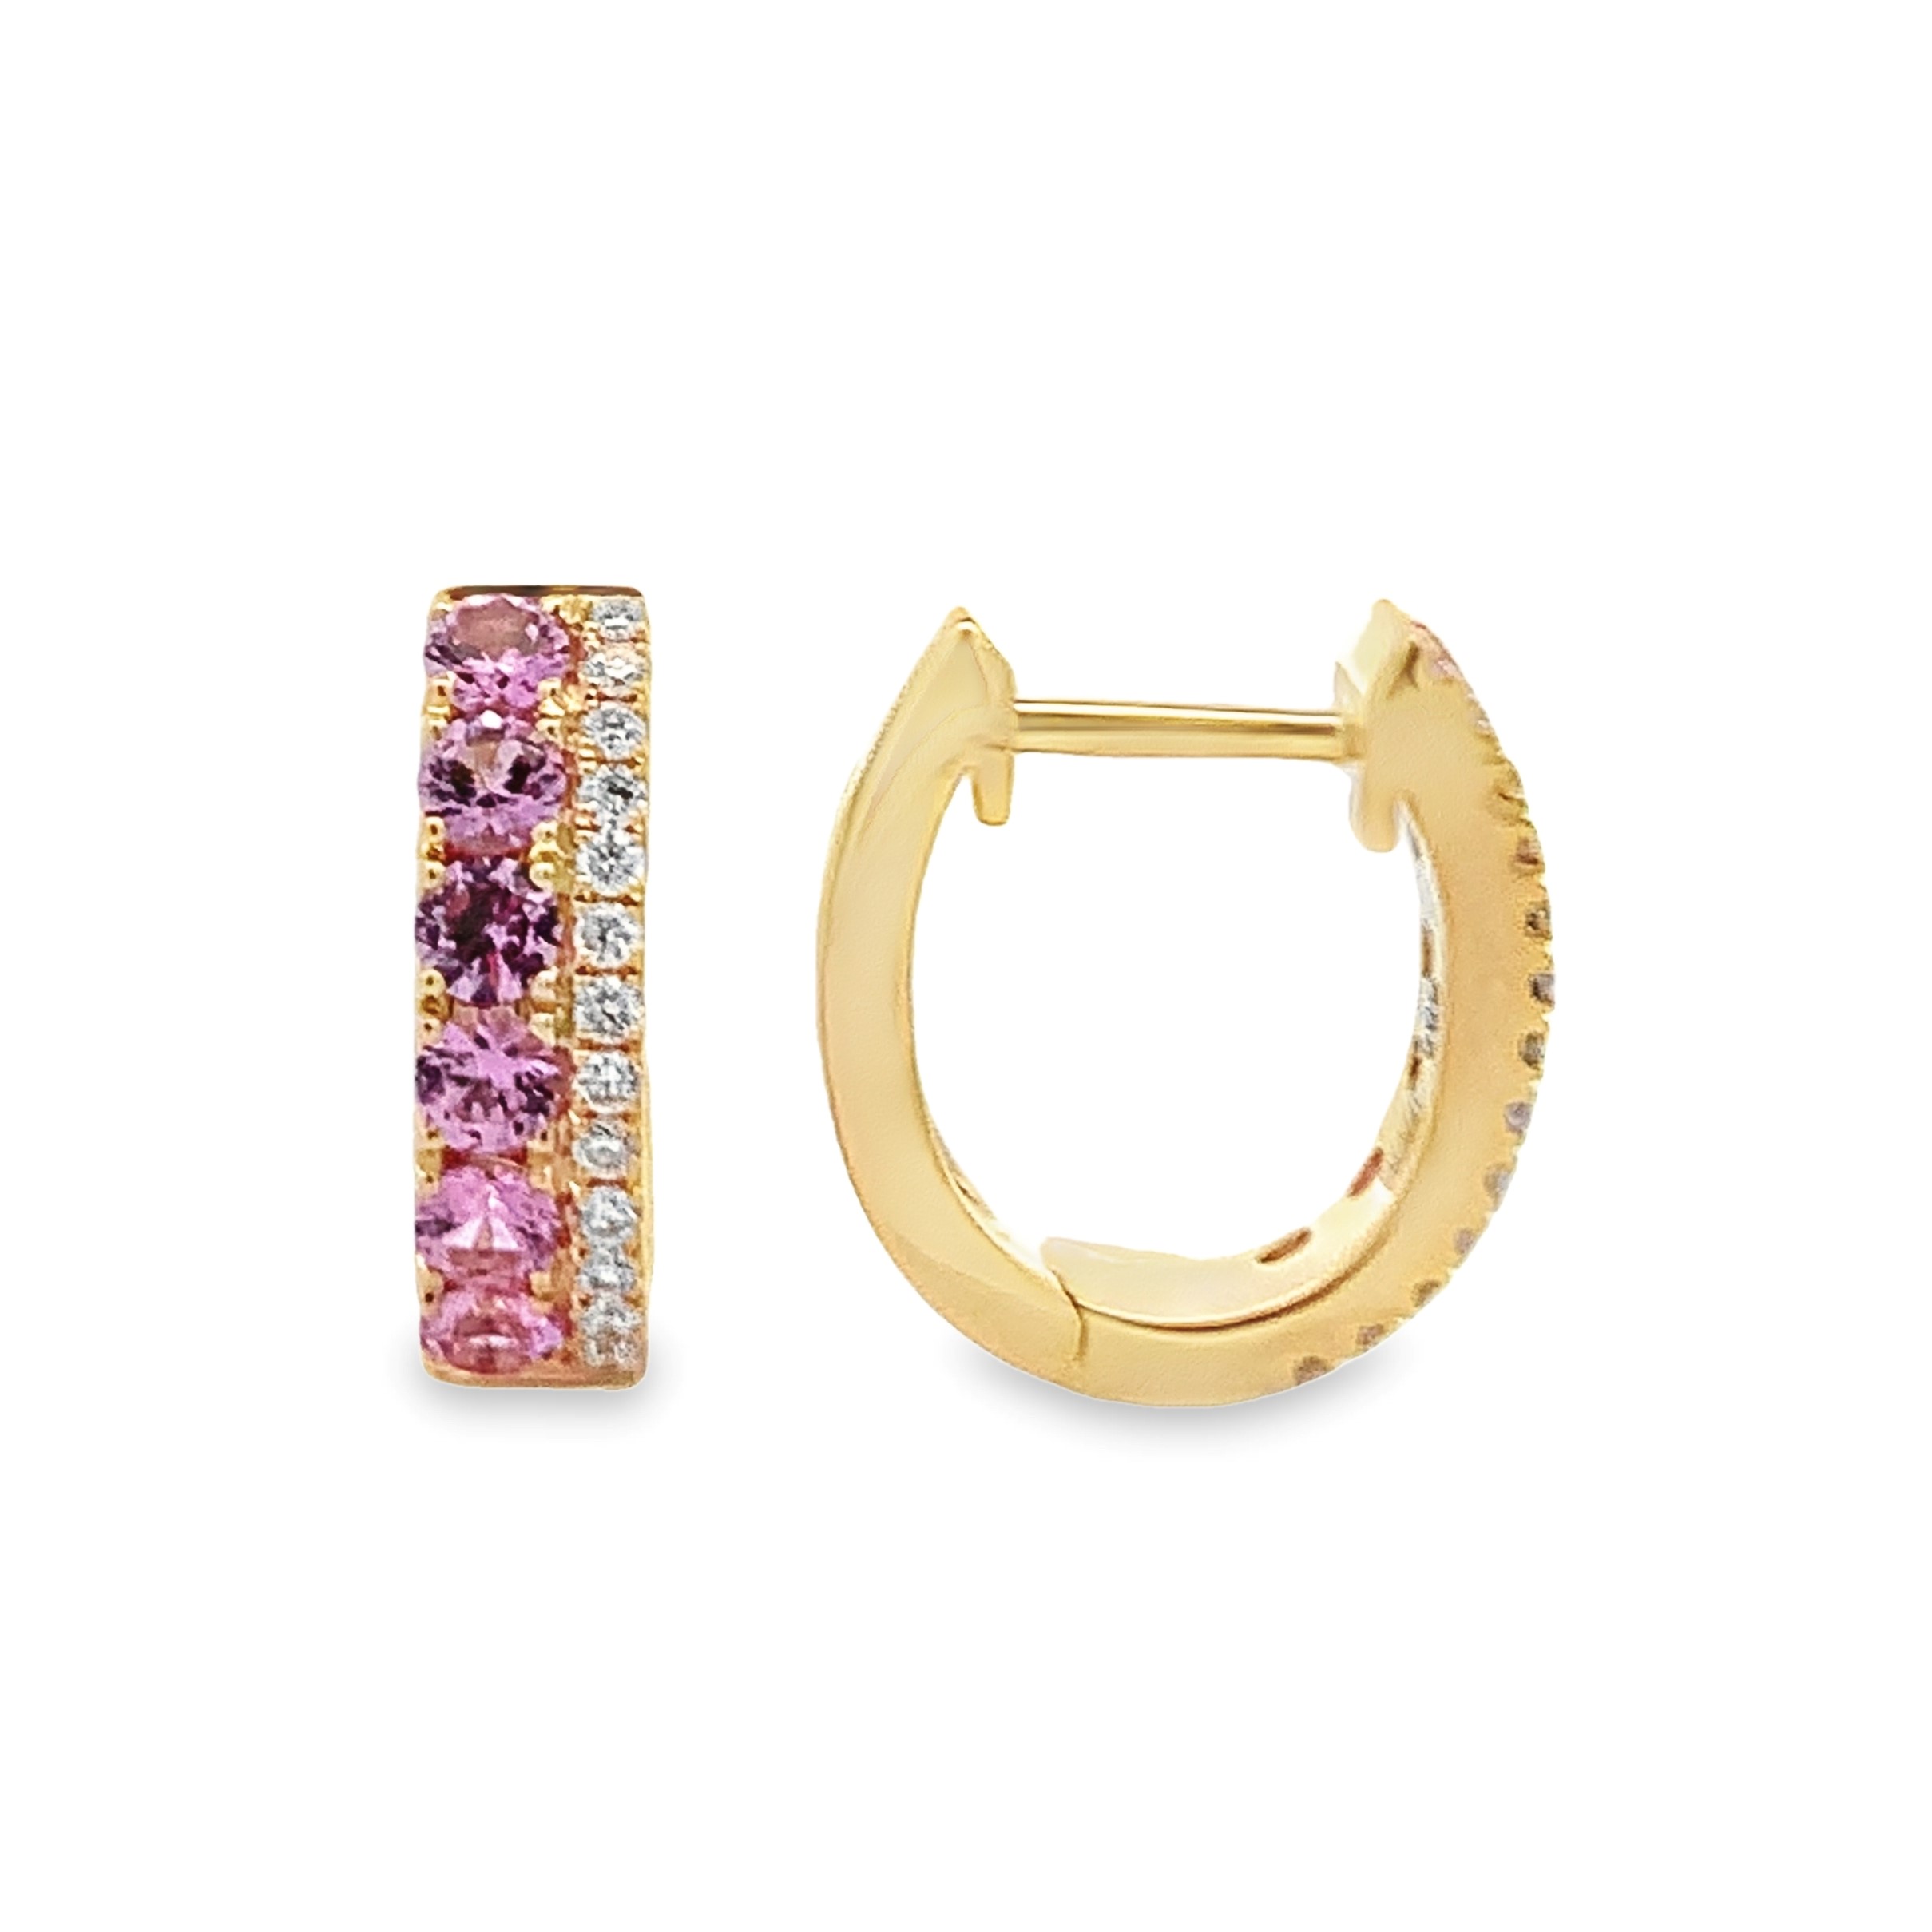 Frederic Sage 14K Yellow Gold Pink Sapphire and Diamond Huggie Earrings